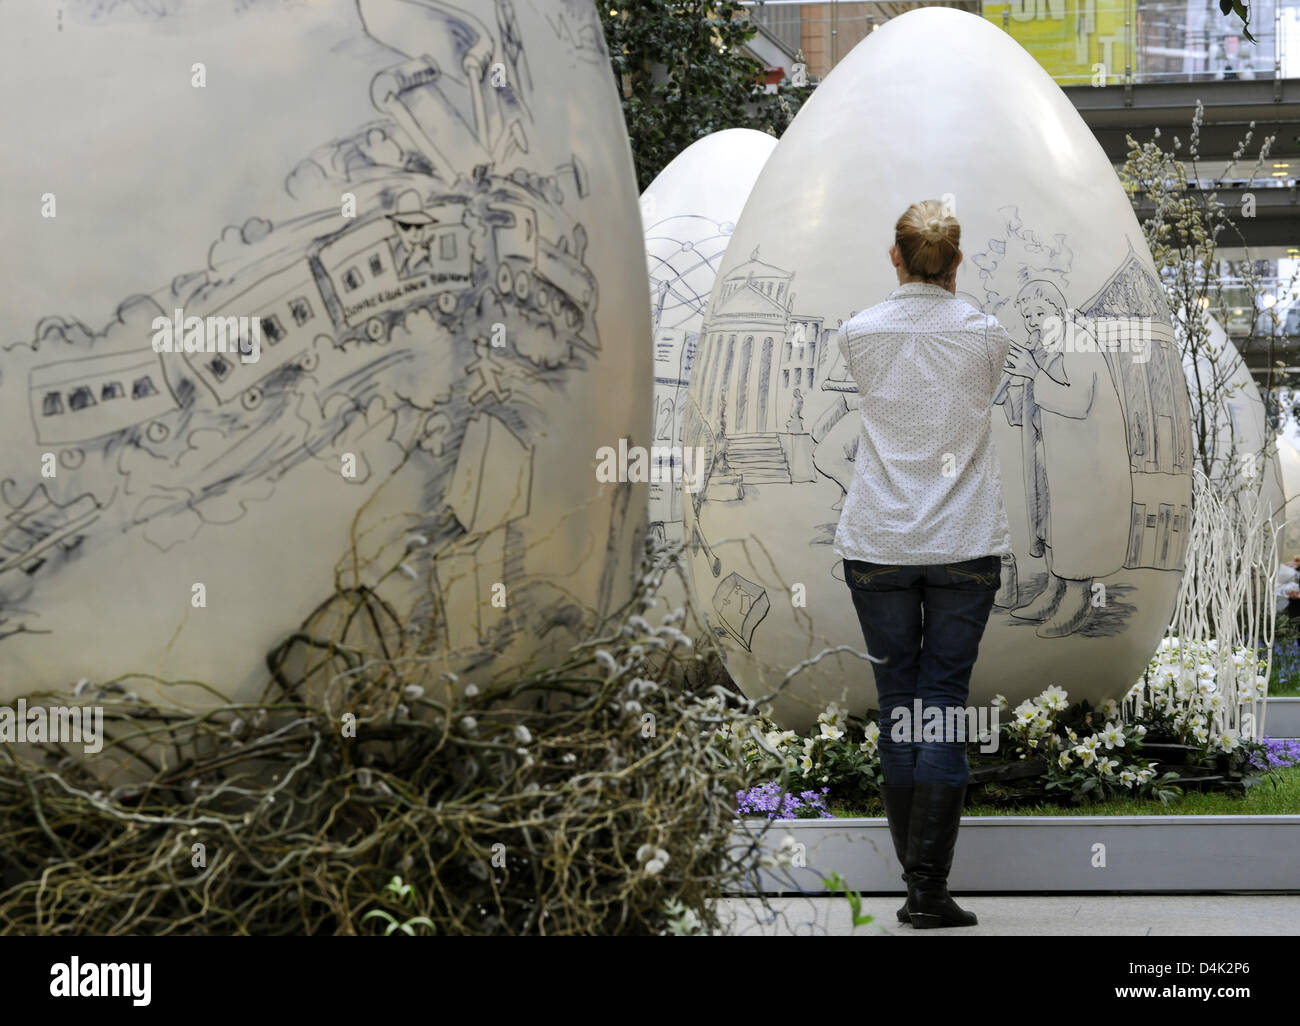 A woman reviews 2,5m high ?Easter Eggs? placed at ?Potsdamer Platz Arcades? as decoration in Berlin, Germany, 23 March 2009. The eggs were designed and painted on with cartoons by artist Knut Weise. Photo: TIM BRAKEMEIER Stock Photo